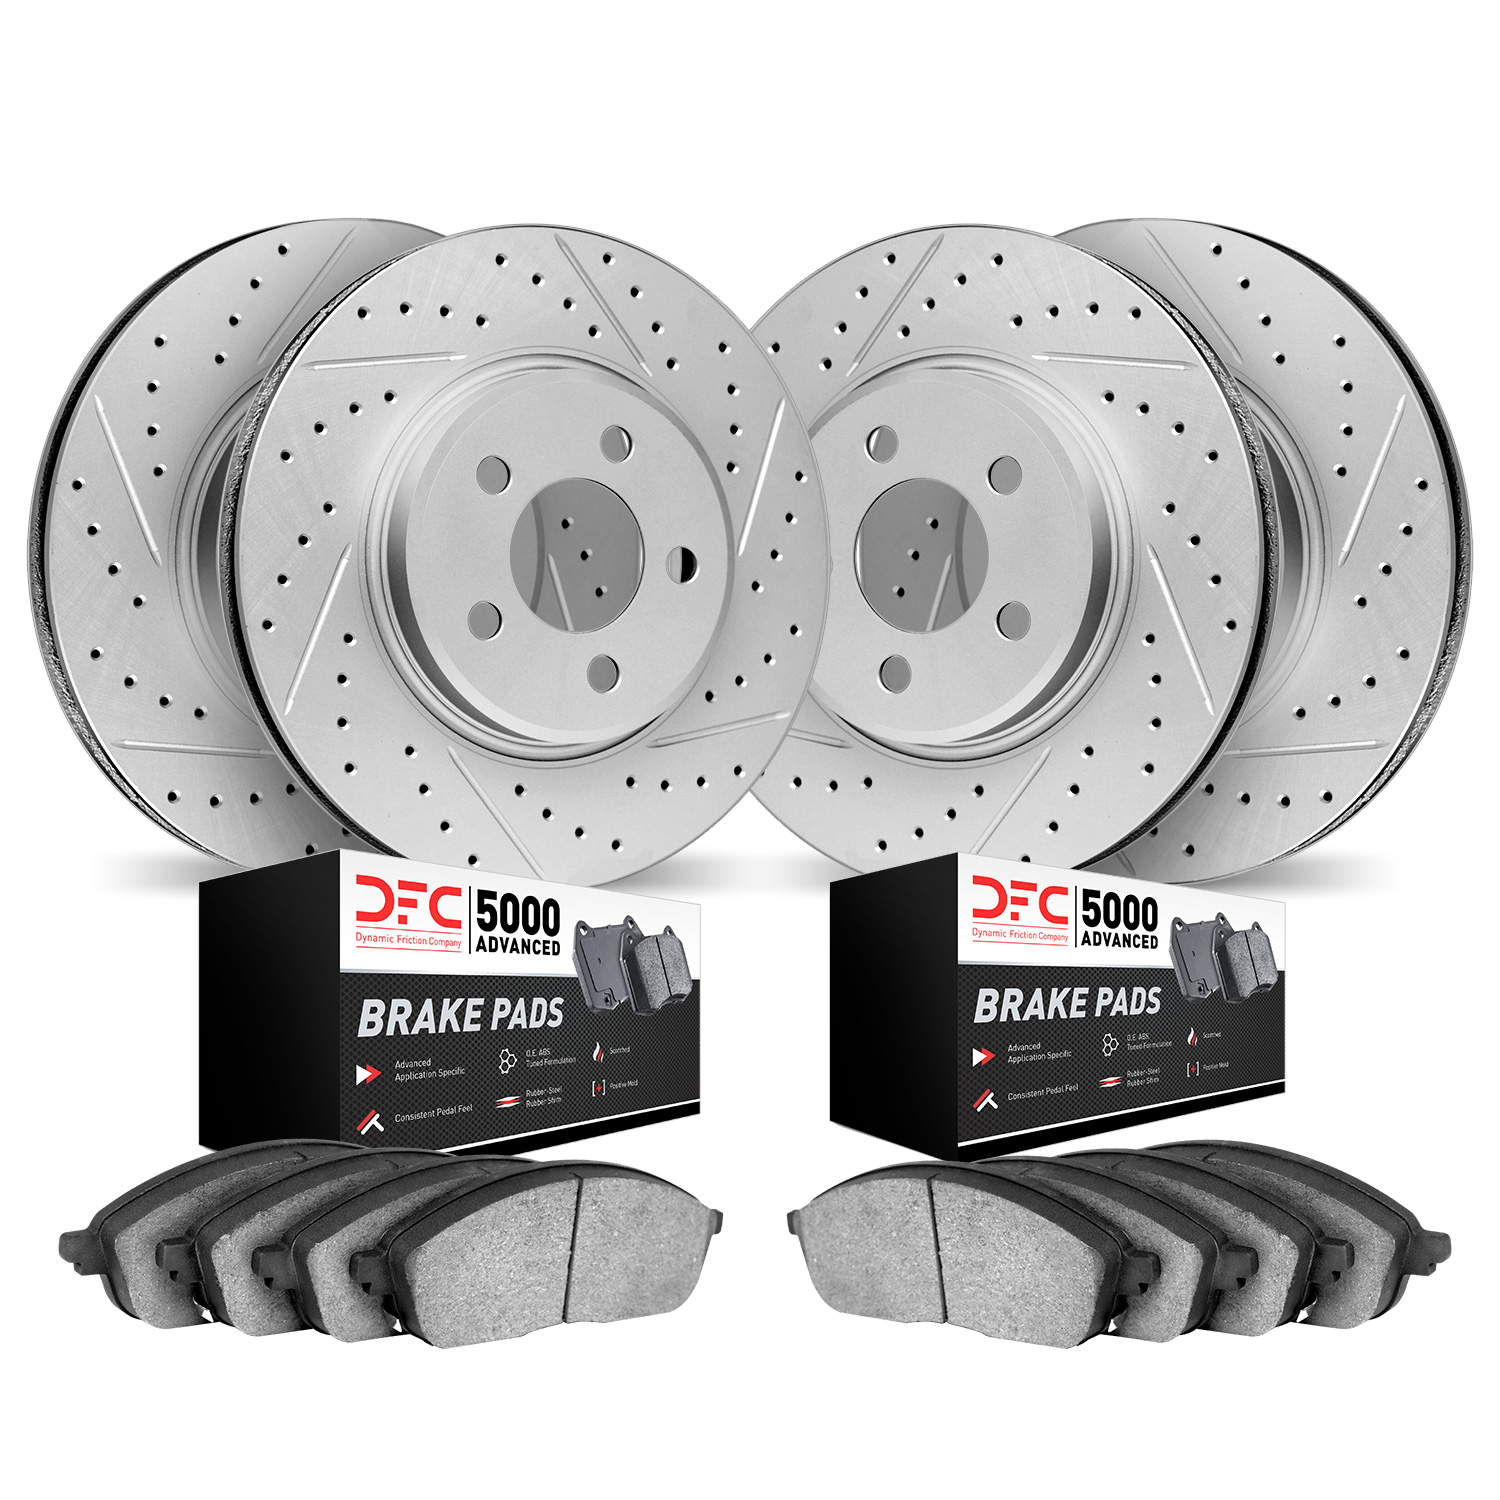 2504-68001 Geoperformance Drilled/Slotted Rotors w/5000 Advanced Brake Pads Kit, 2008-2020 Infiniti/Nissan, Position: Front and